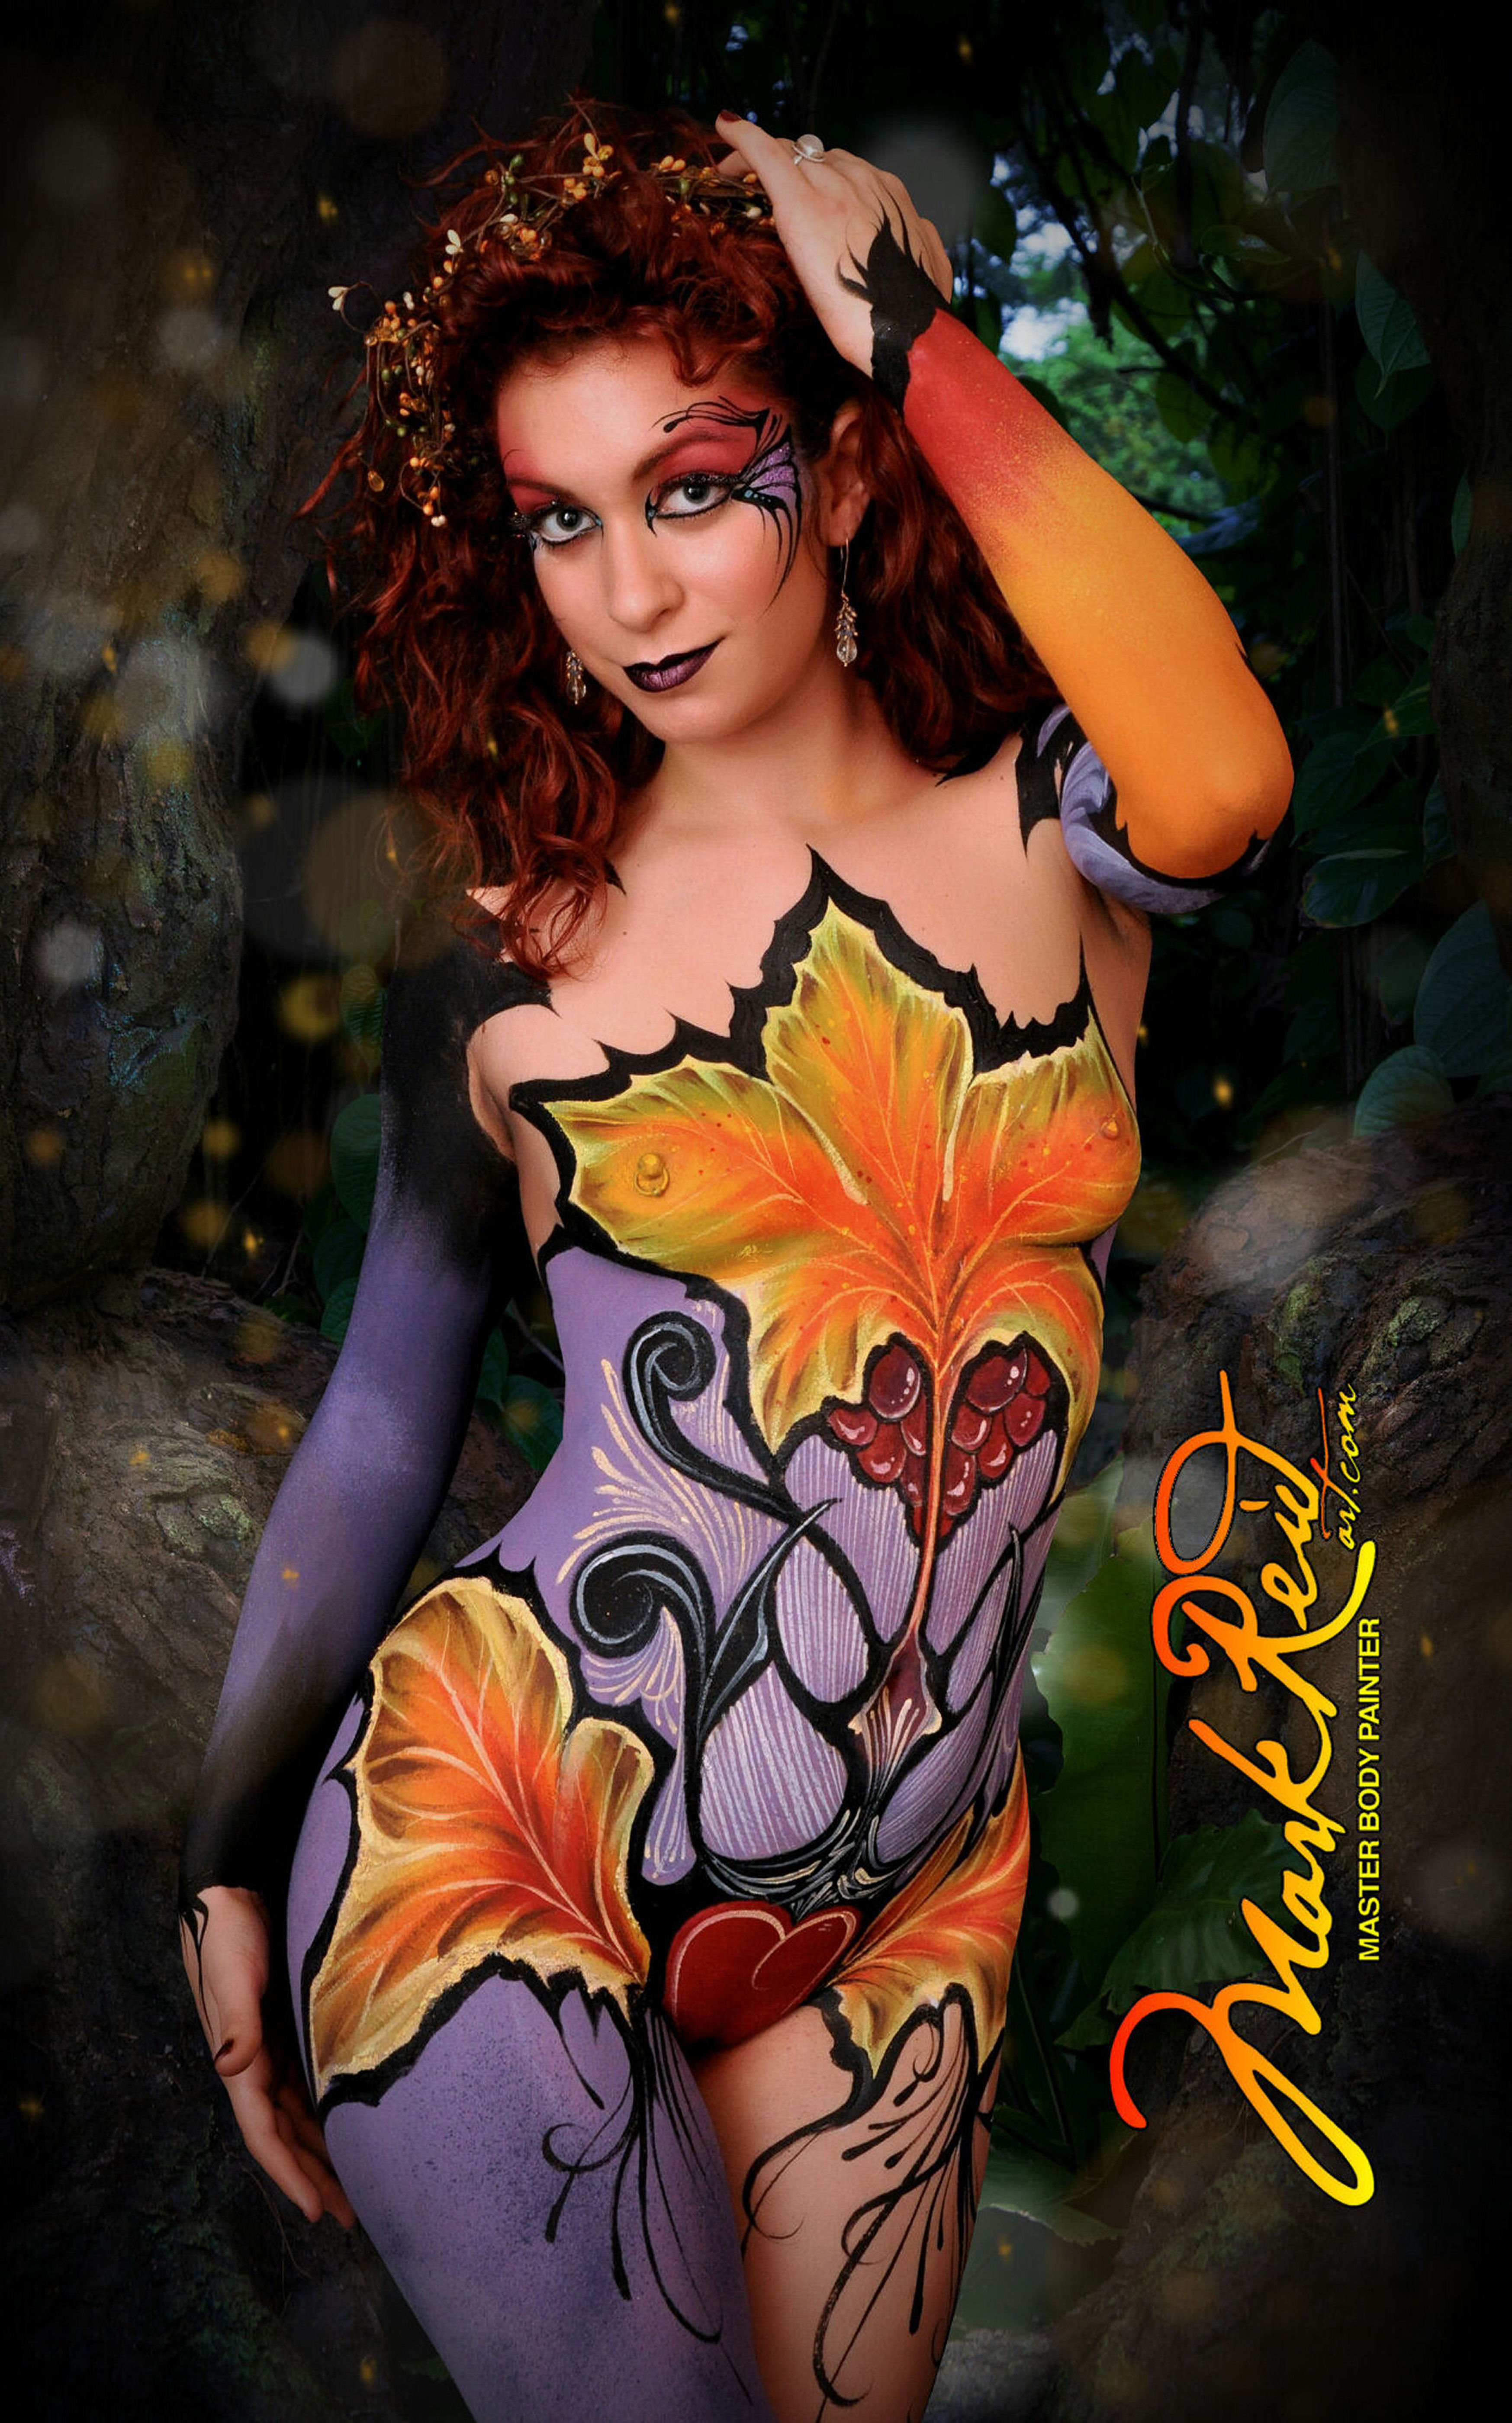 Red/brunette haired beauty sporting a full body painting that has elements of grape vines.  Very detailed painting.